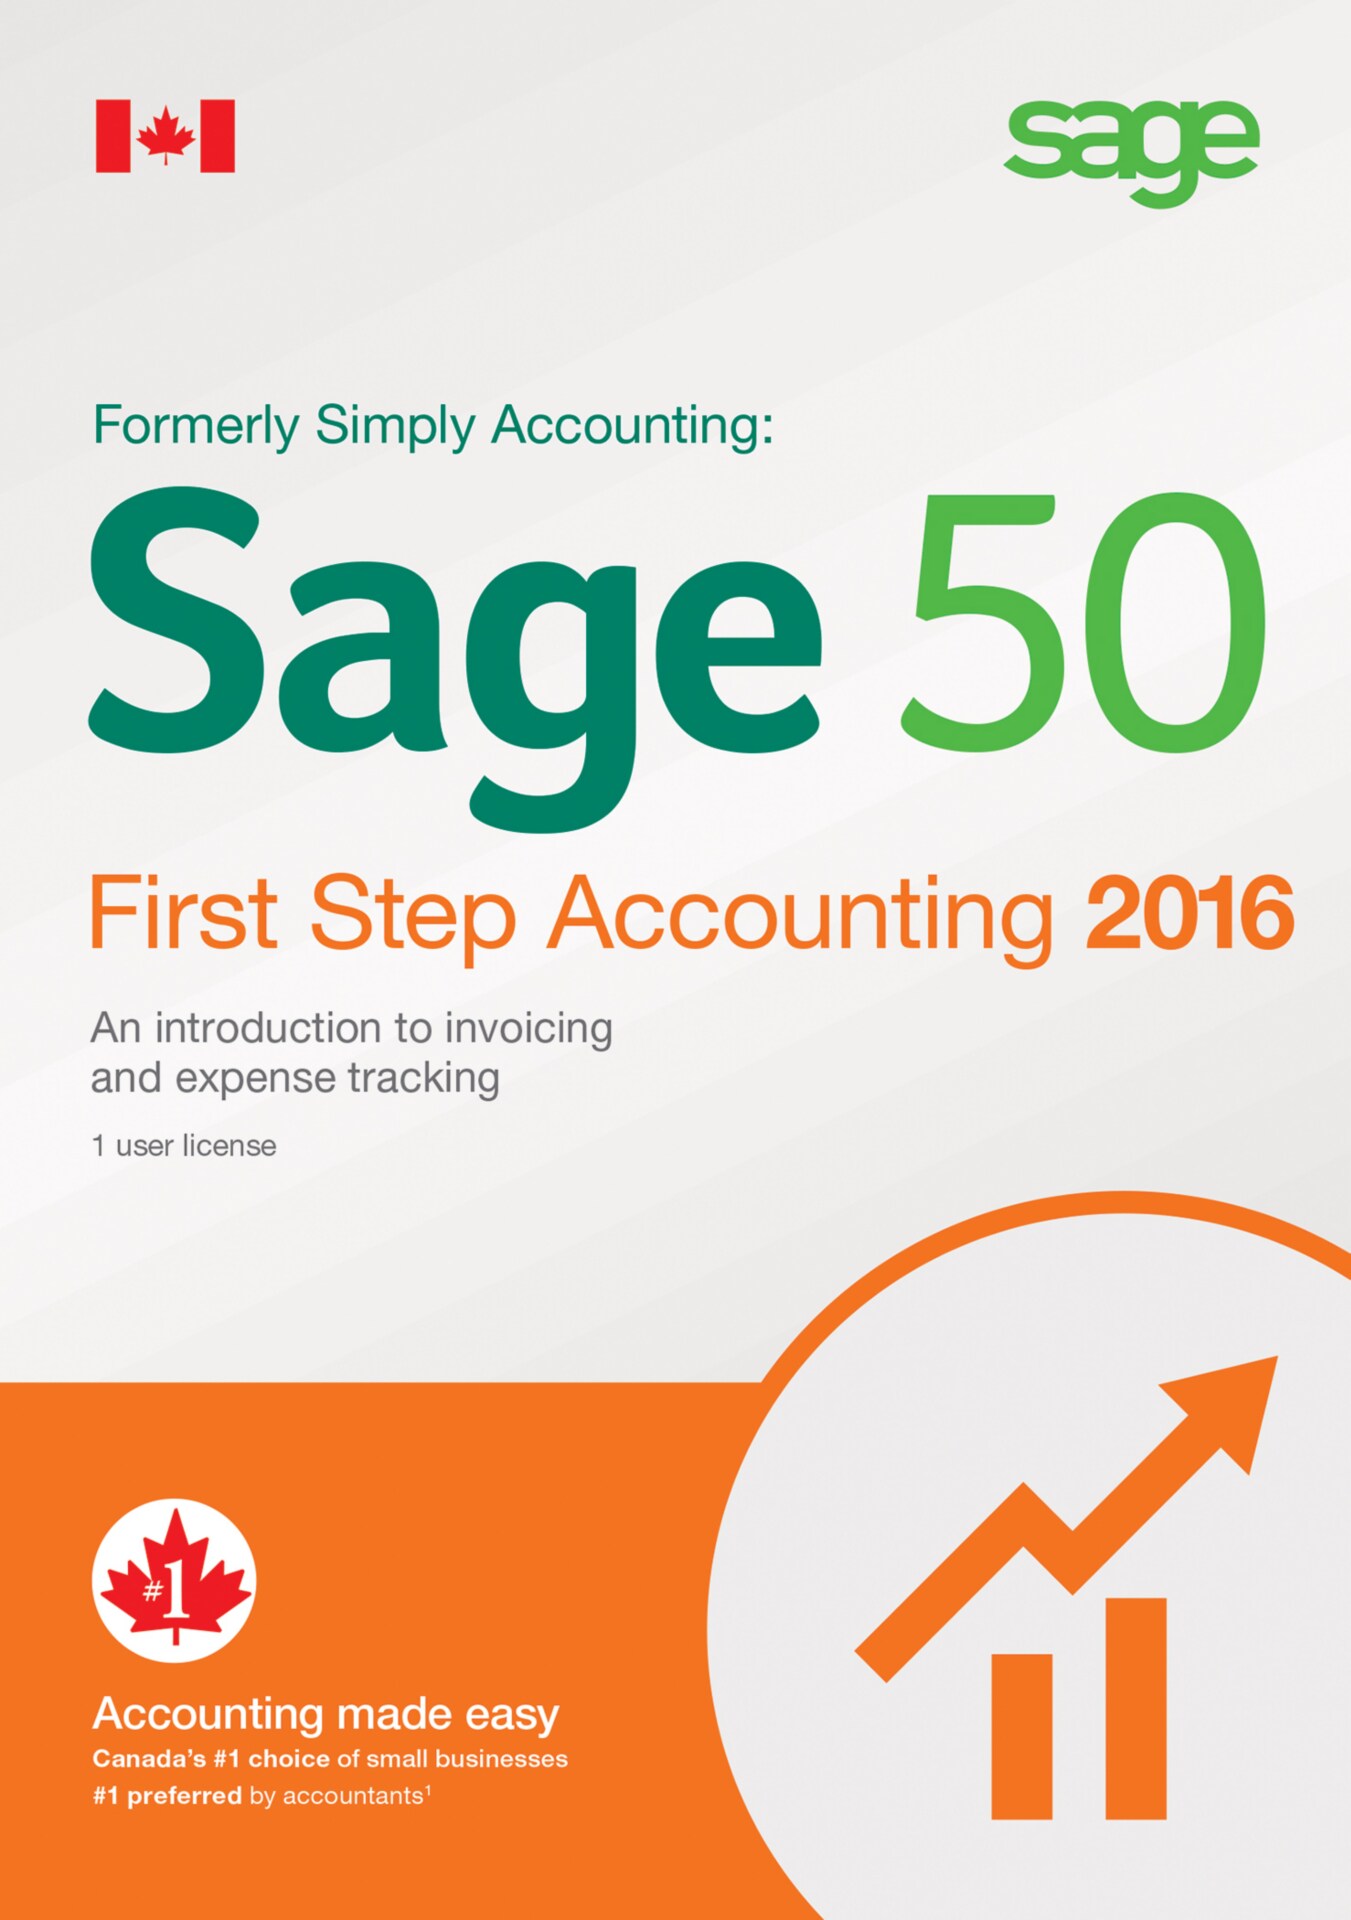 Sage 50 First Step Accounting